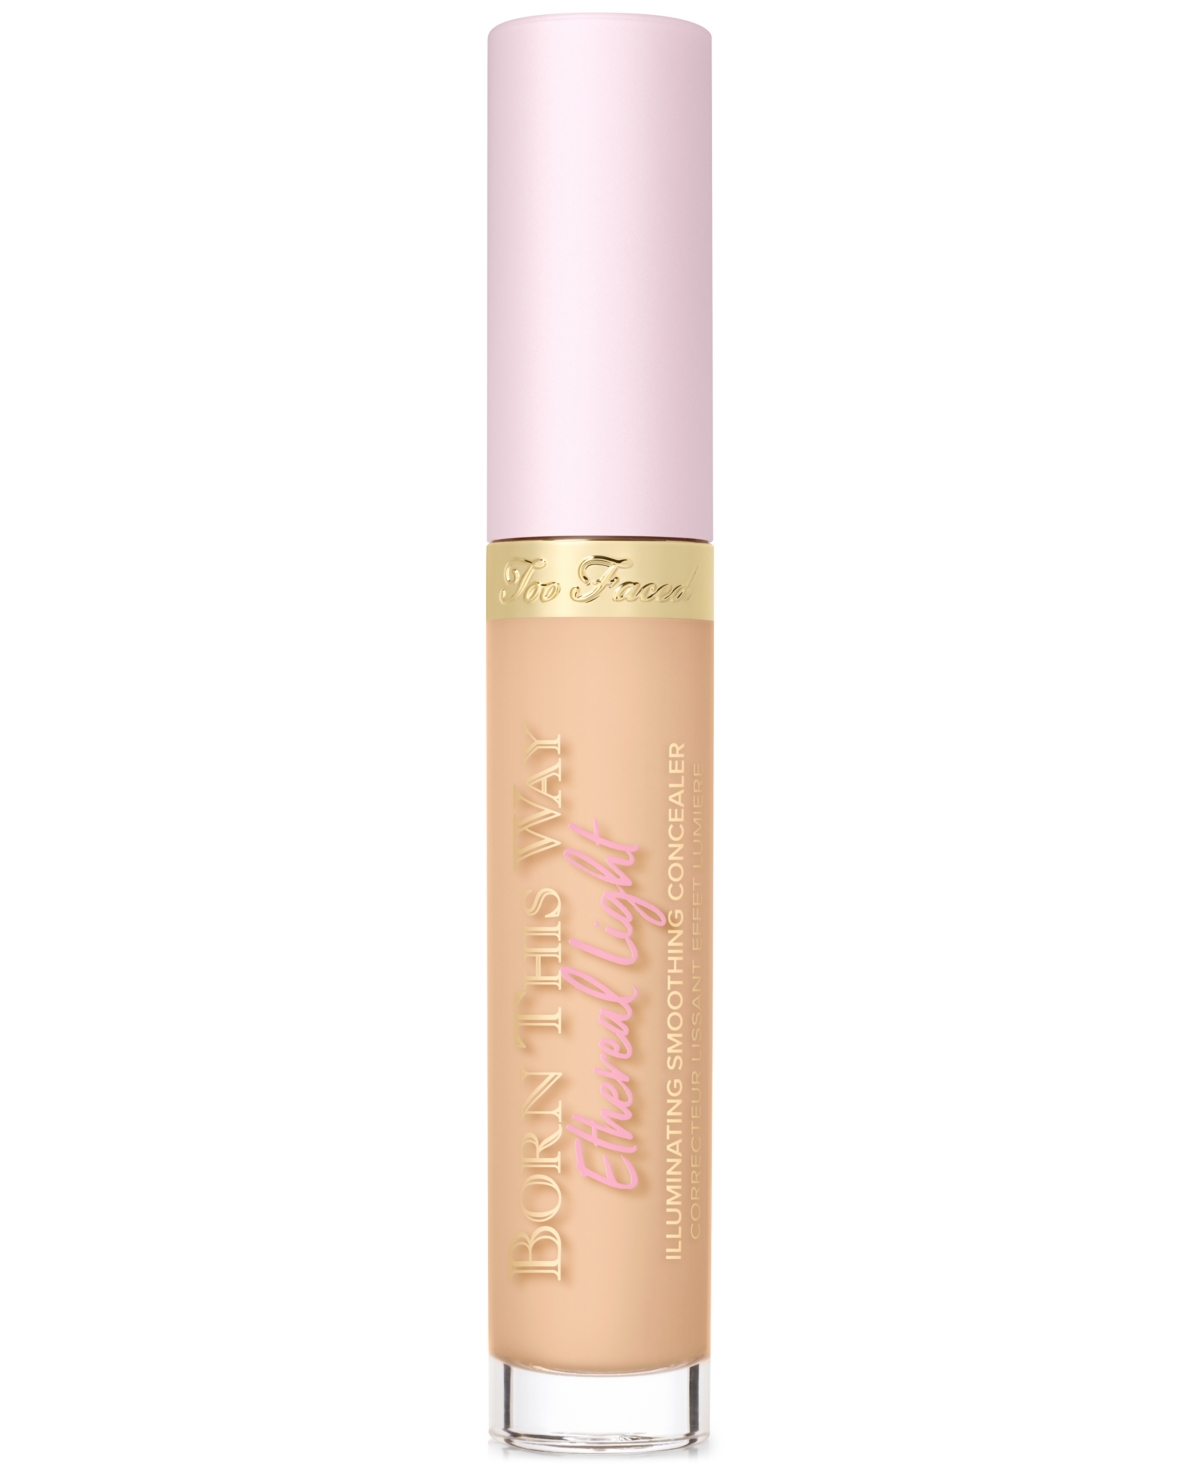 Too Faced Born This Way Ethereal Light Illuminating Smoothing Concealer In Pecan - Light Medium With Neutral Undert